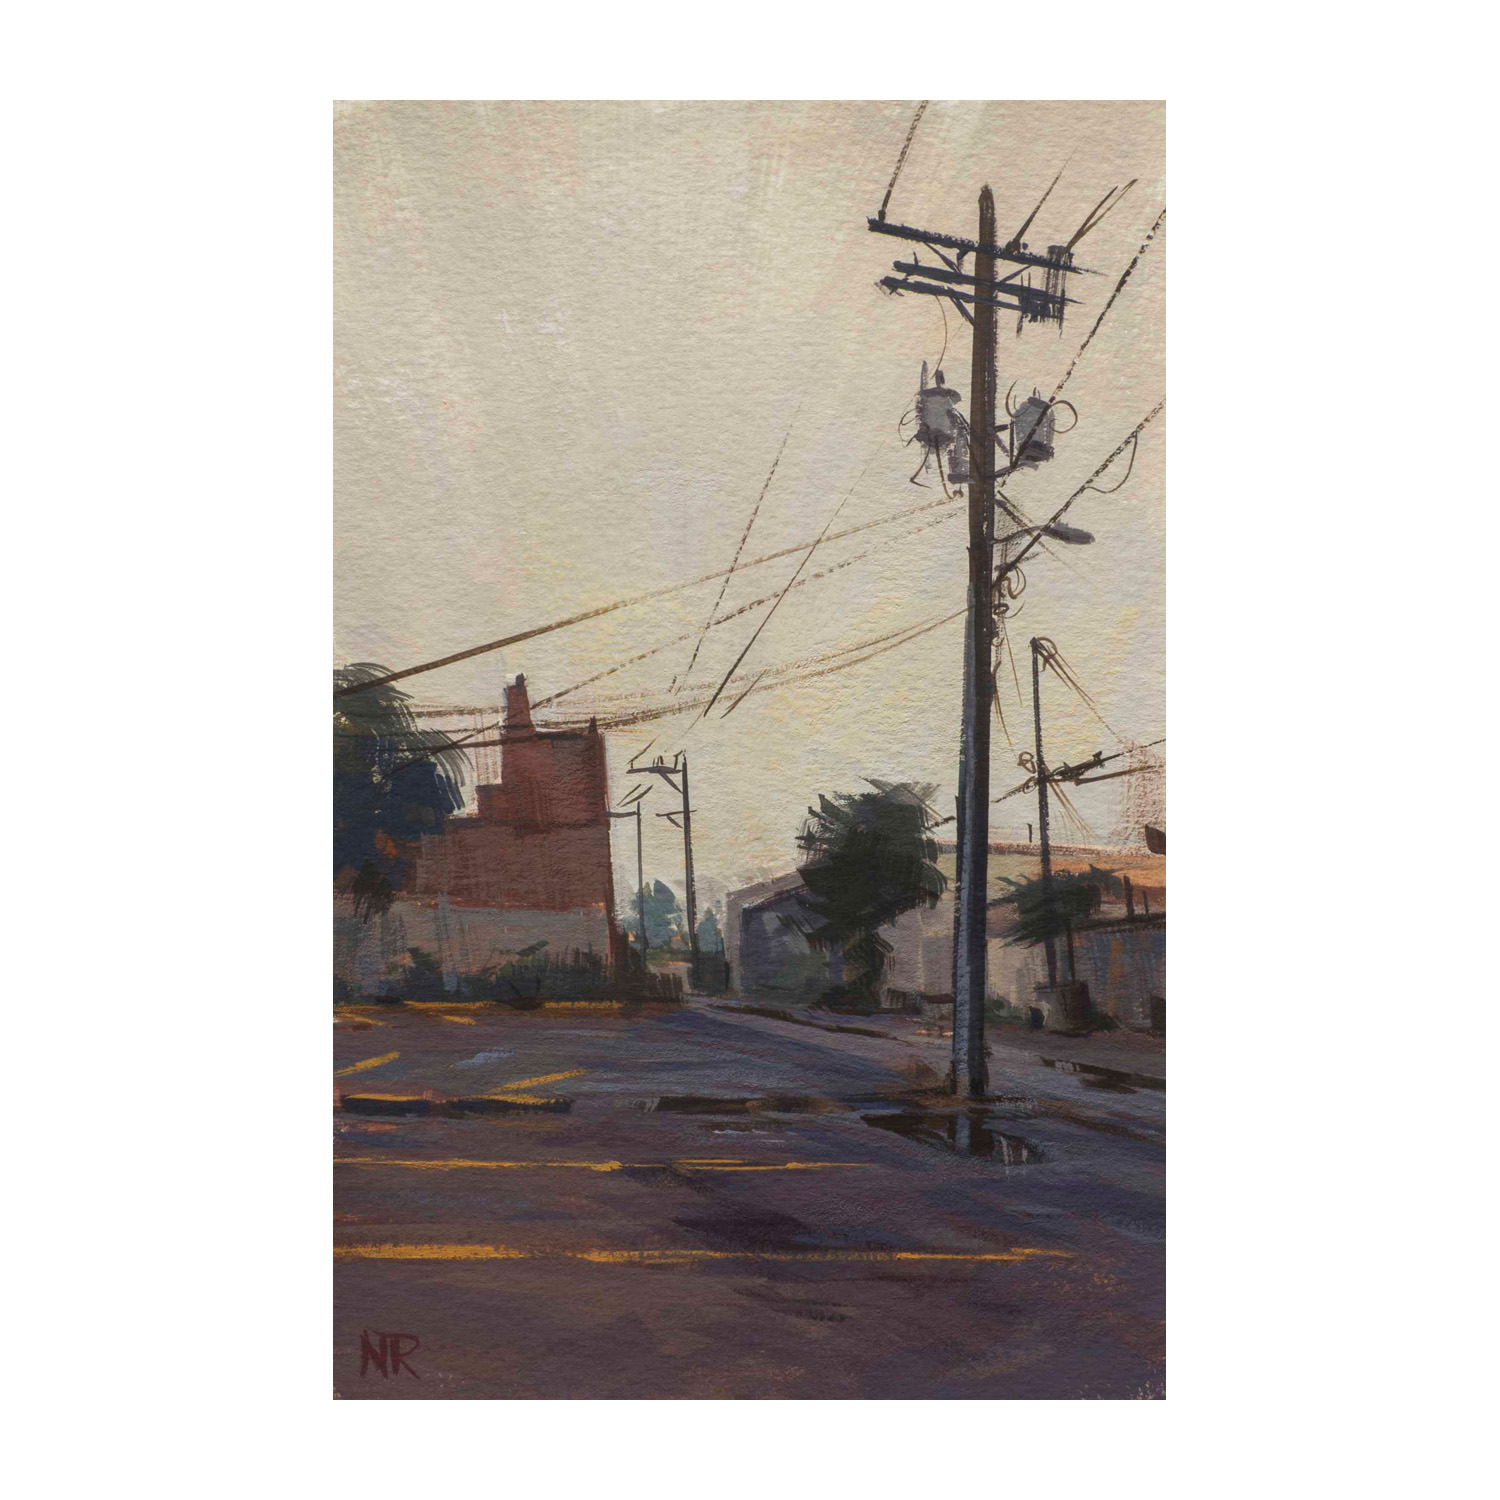 Alley Wires Study